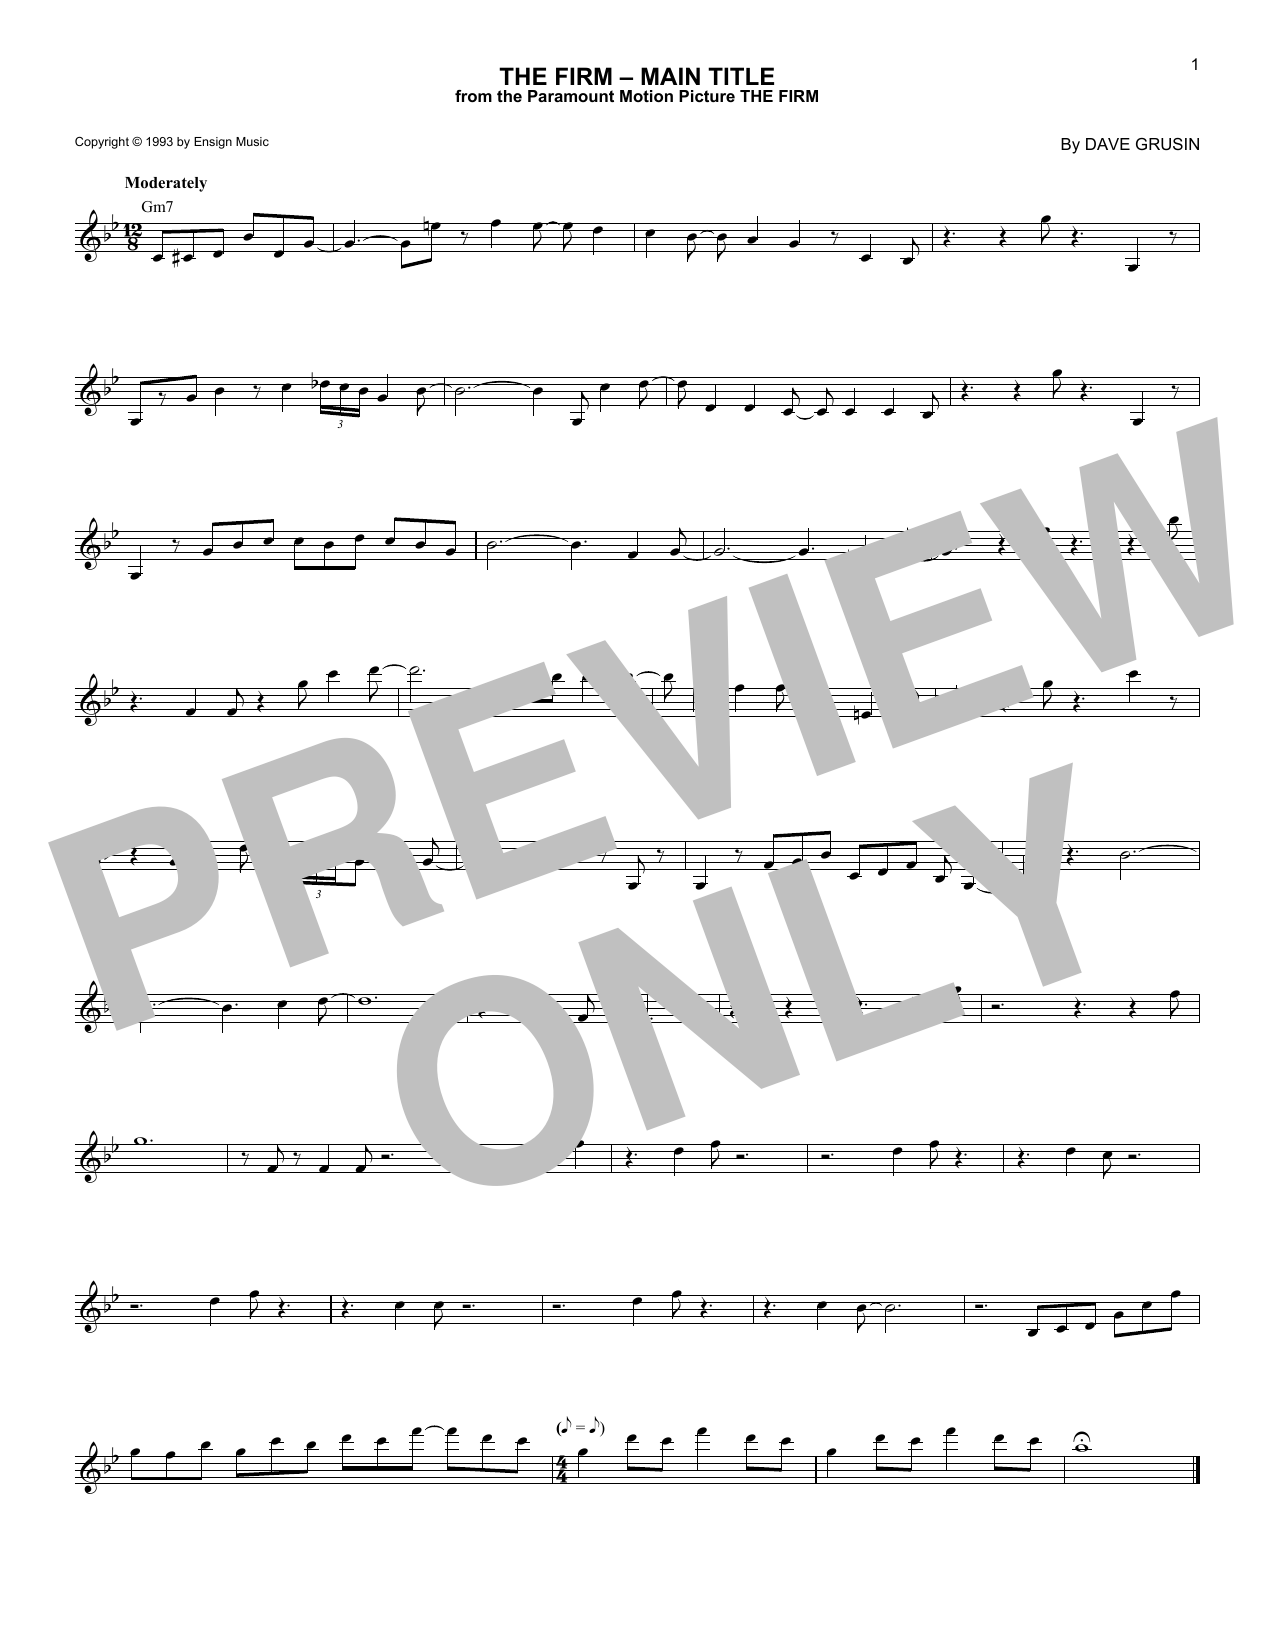 Download Dave Grusin The Firm - Main Title Sheet Music